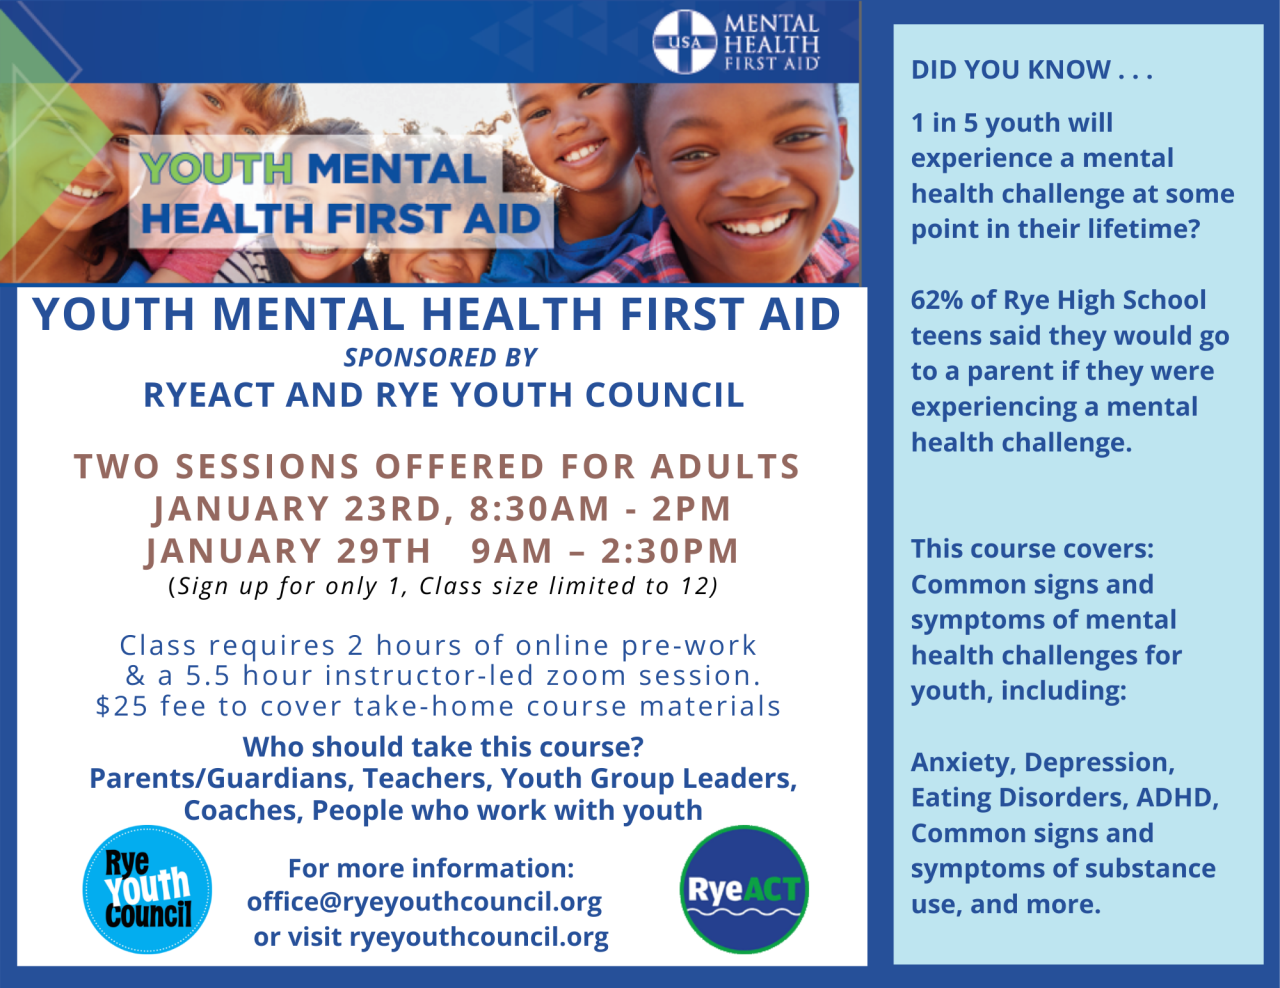 Youth mental health first aid post evaluation knowledge check